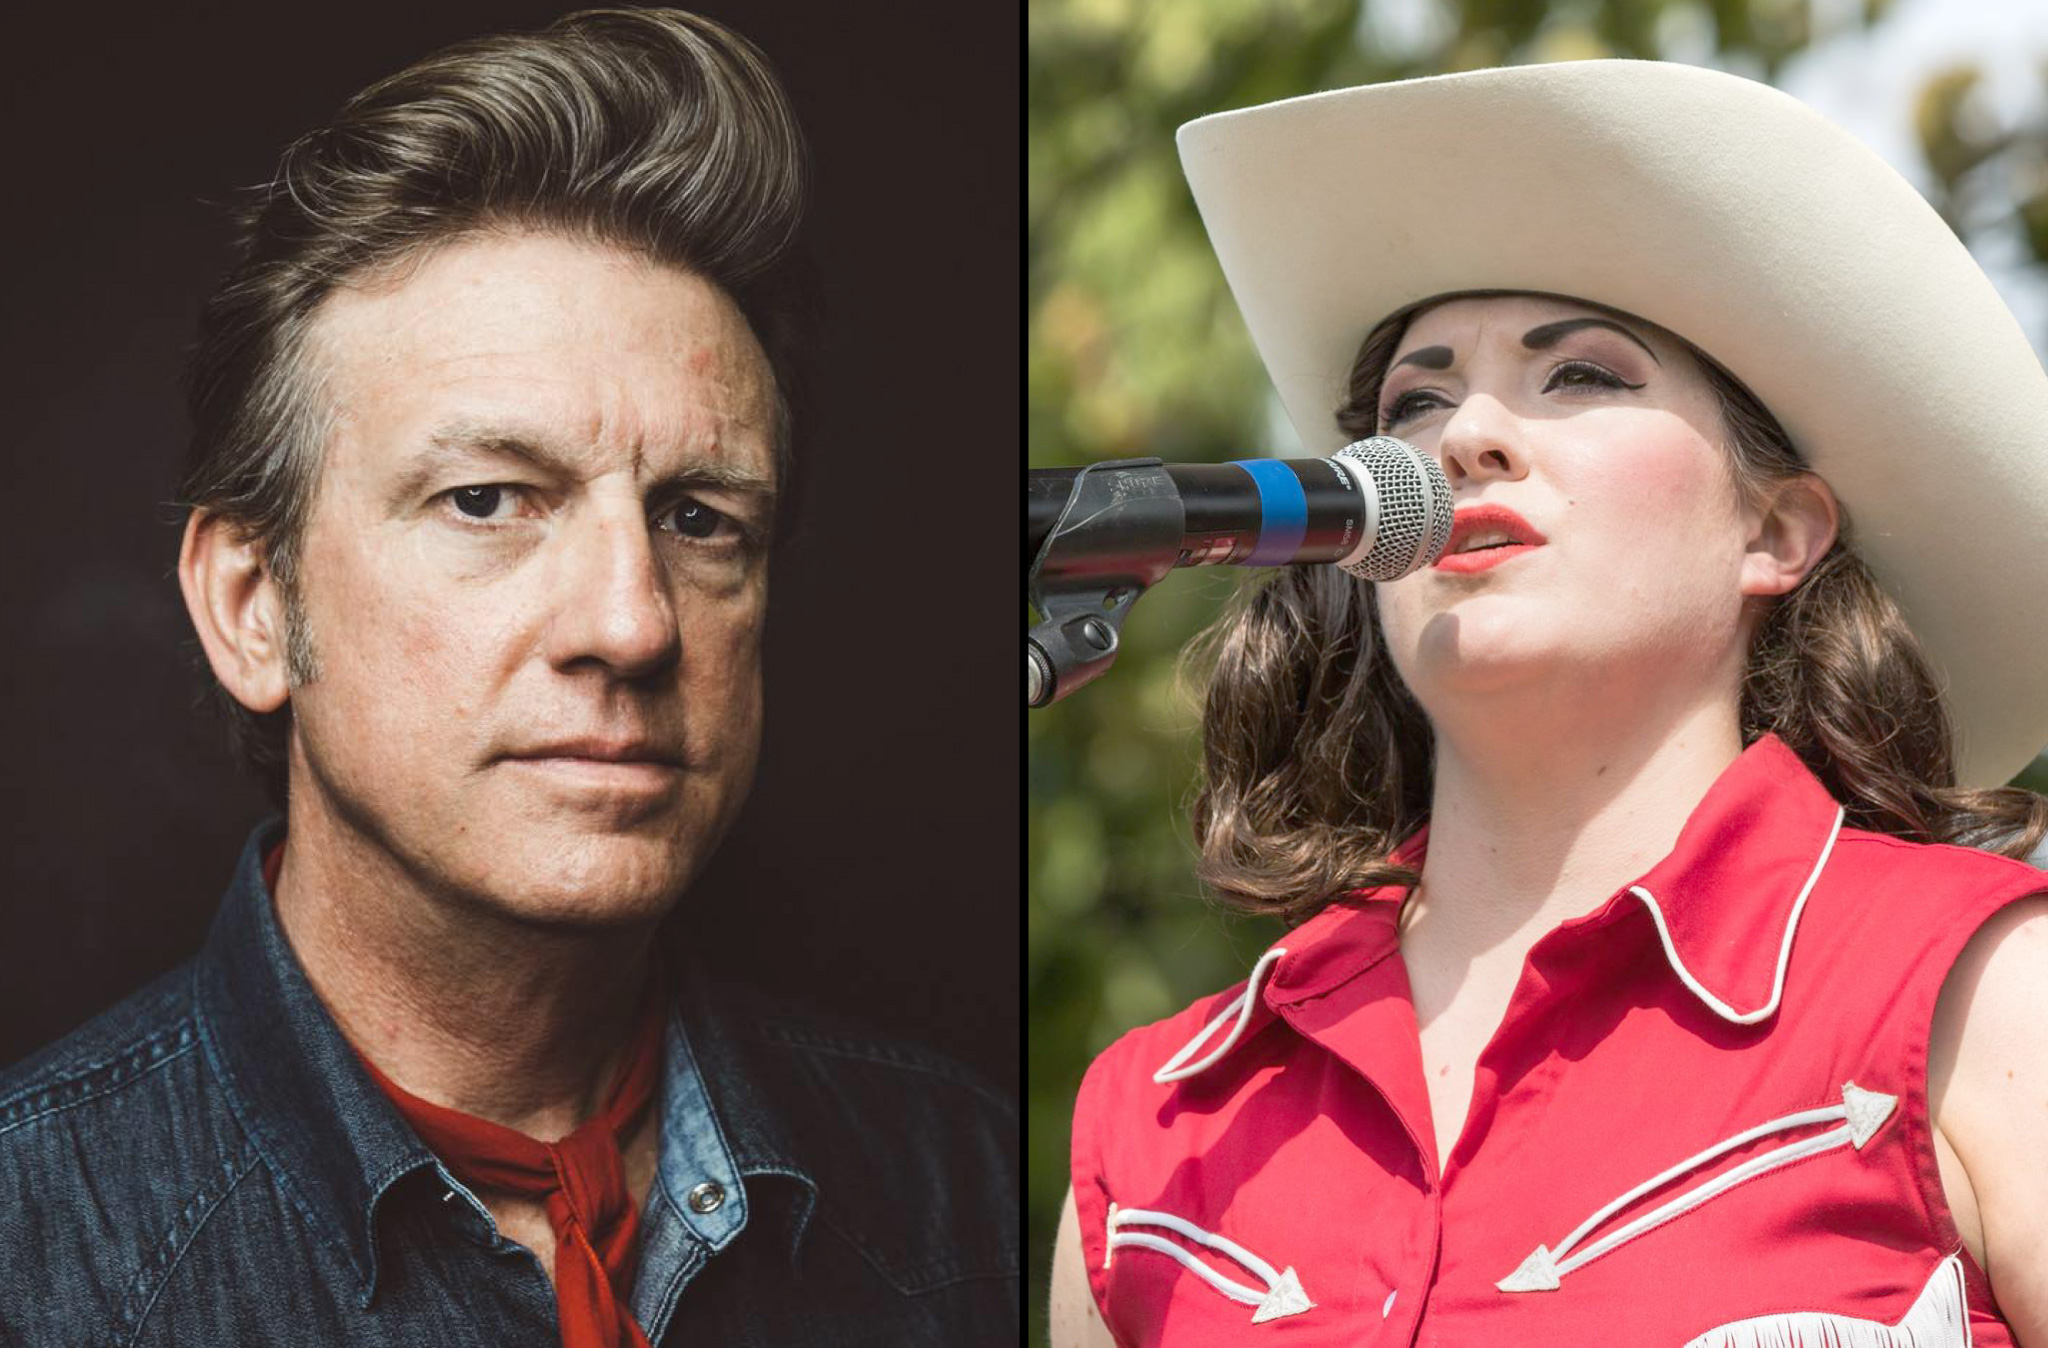 Chuck Mead and Kelsey Rae to perform on Radio Bristol's Farm and Fun Time live variety show.